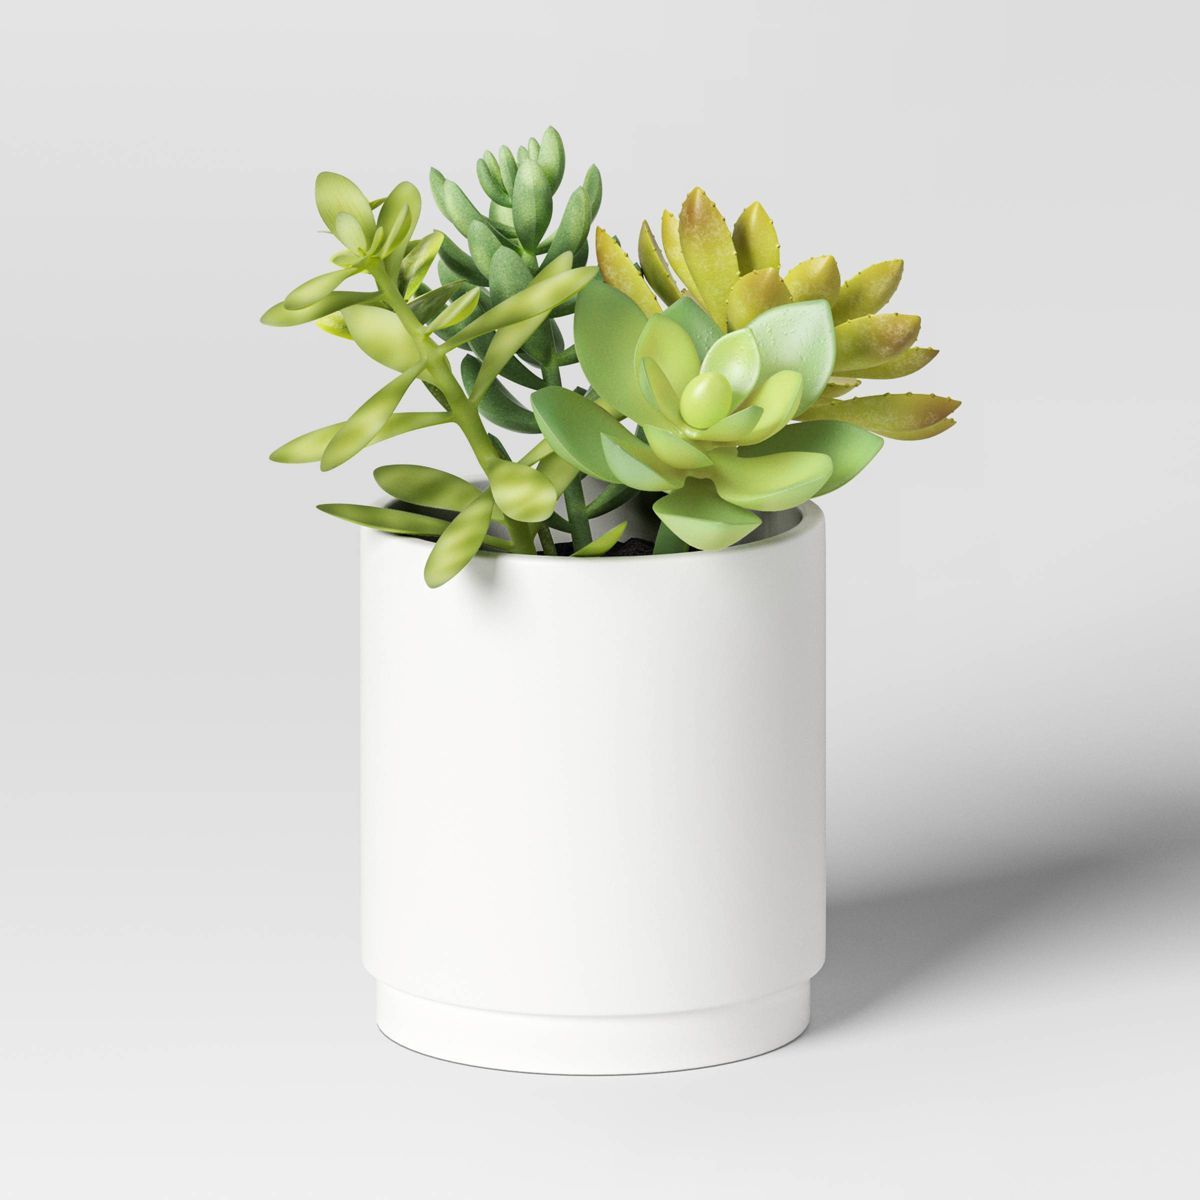 Artificial Succulents Plant in Pot - Threshold™ | Target